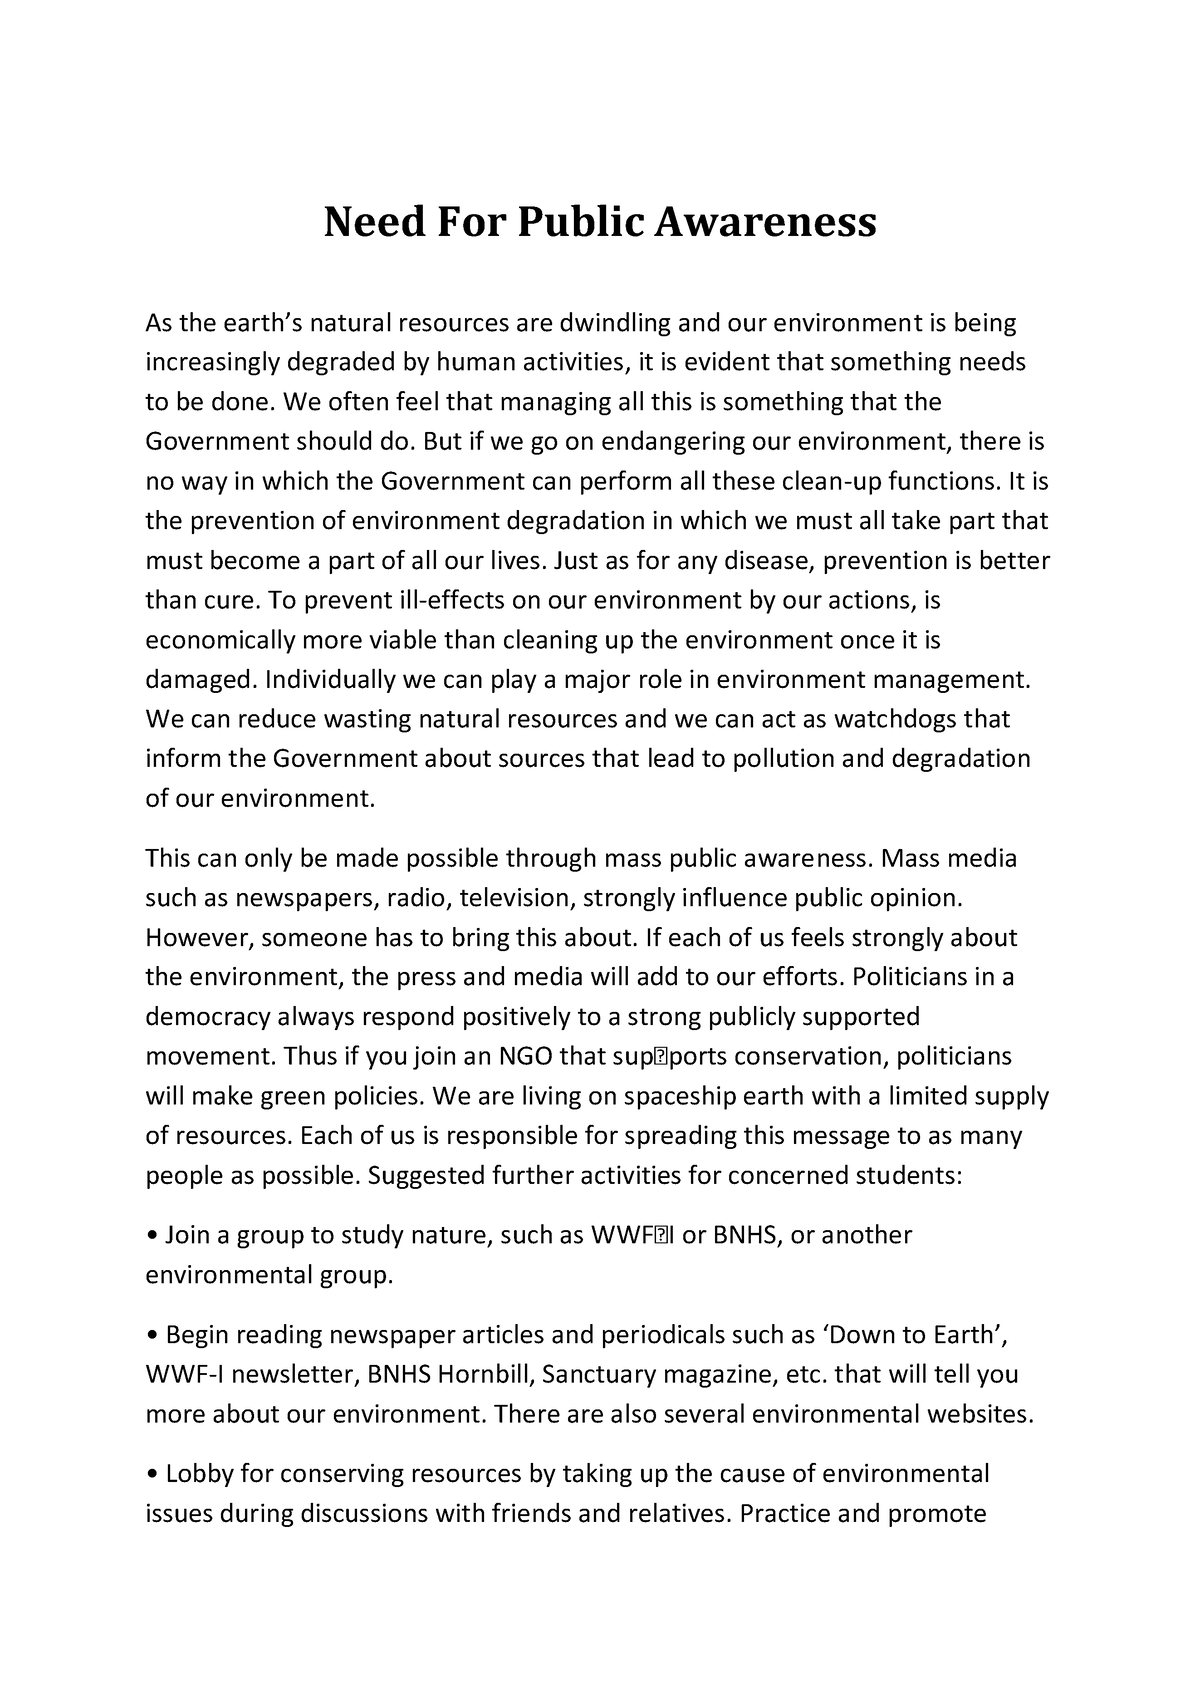 essay on need for public awareness about environment